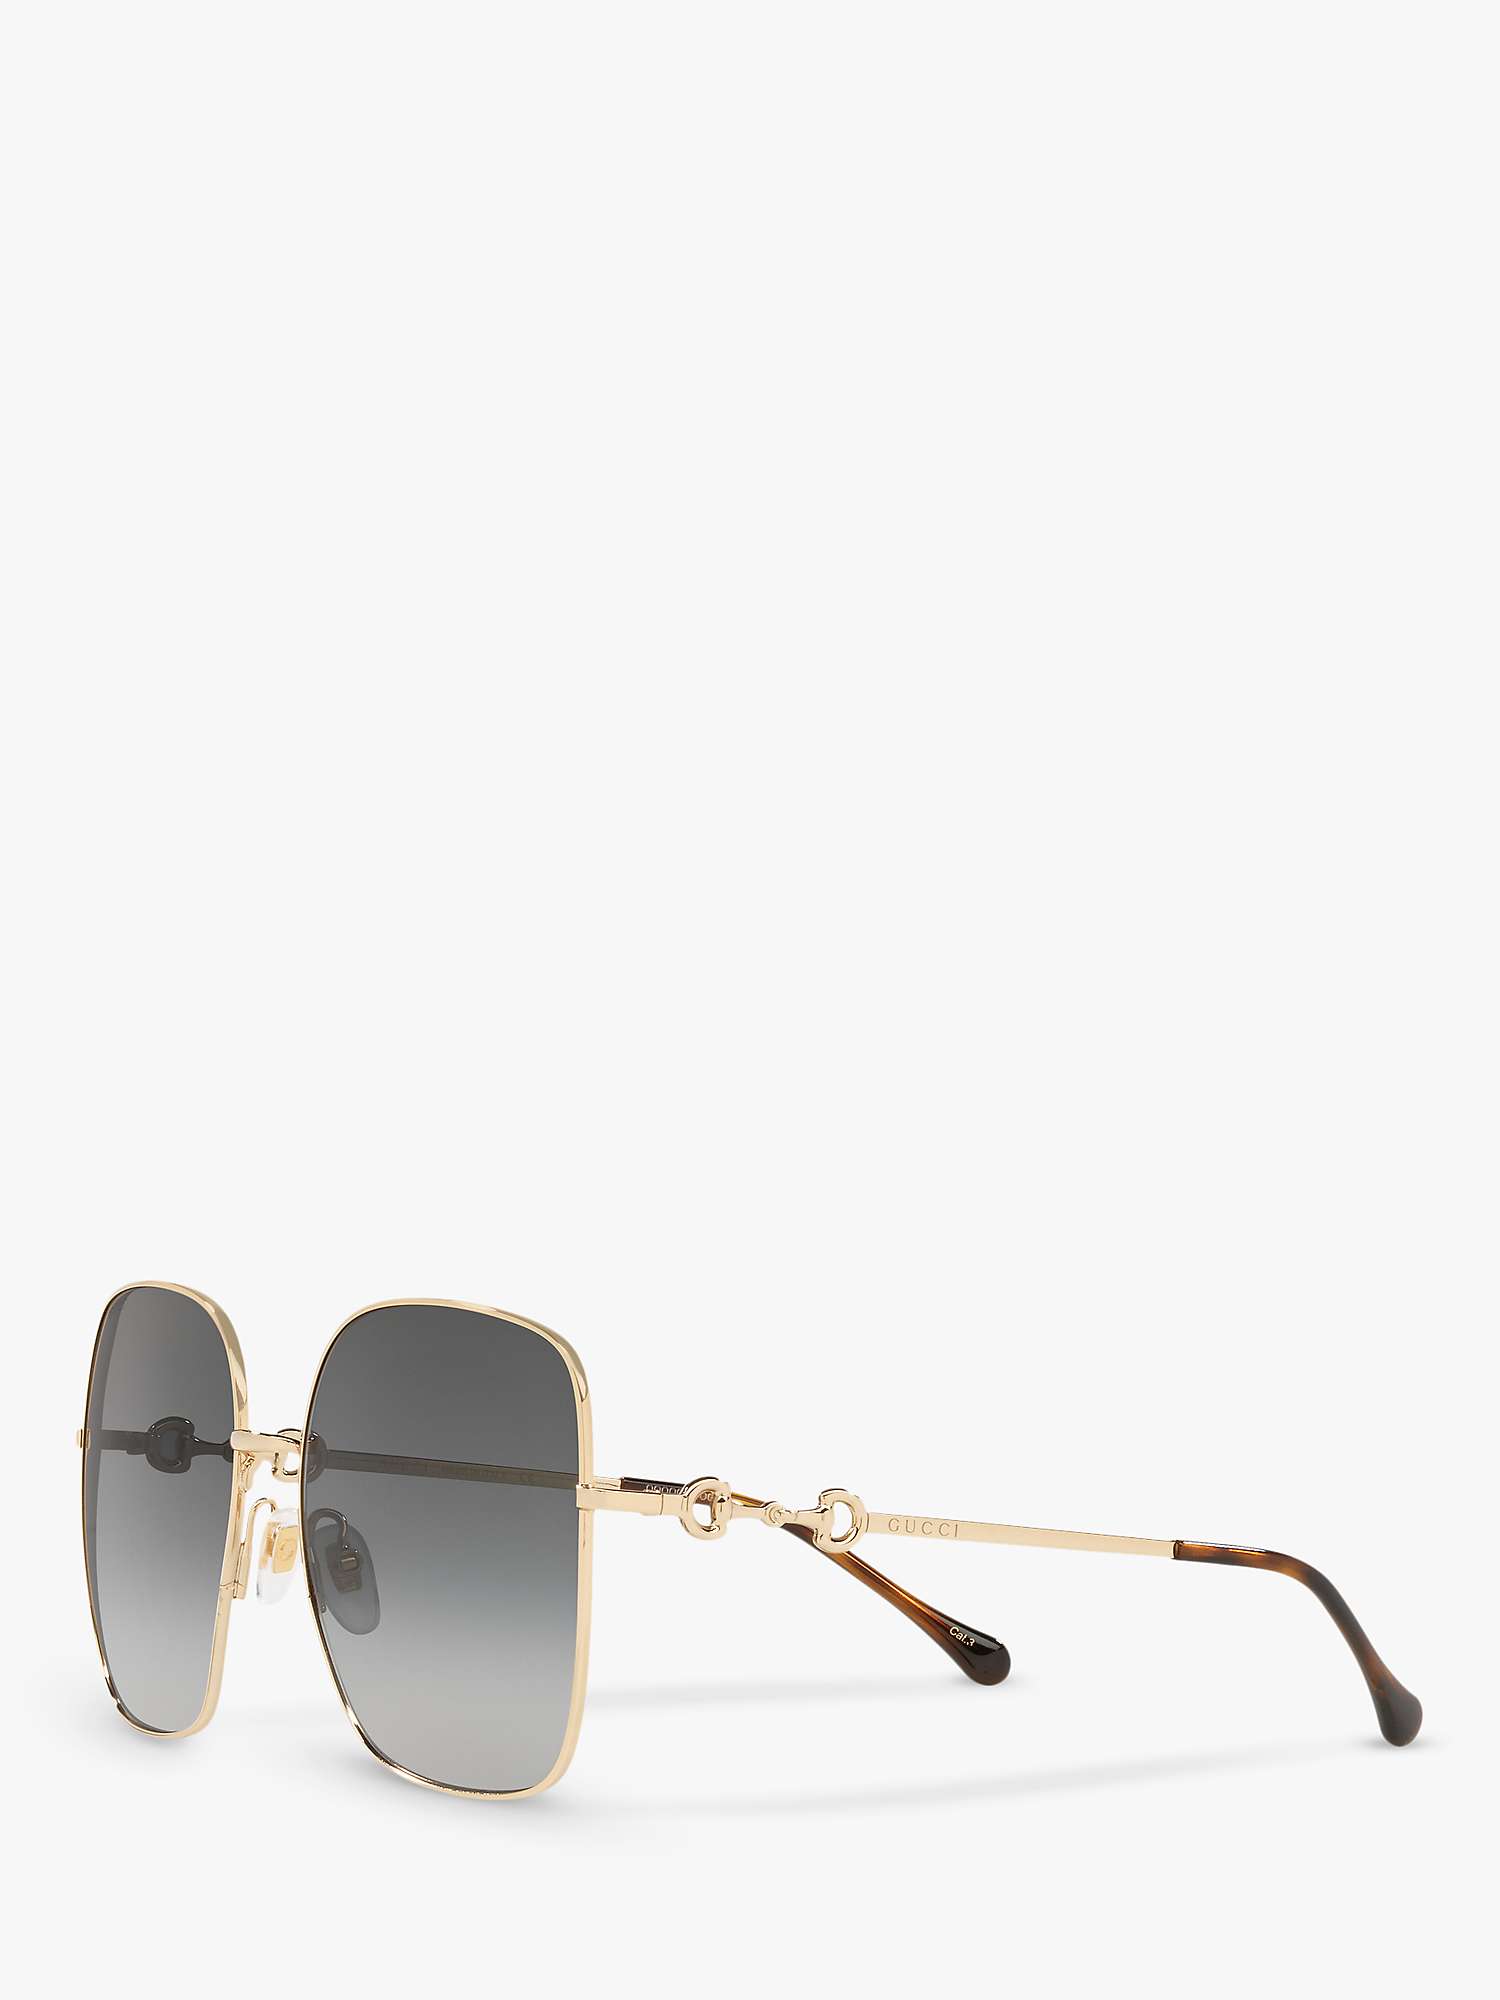 Buy Gucci GG0879S Women's Square Sunglasses Online at johnlewis.com